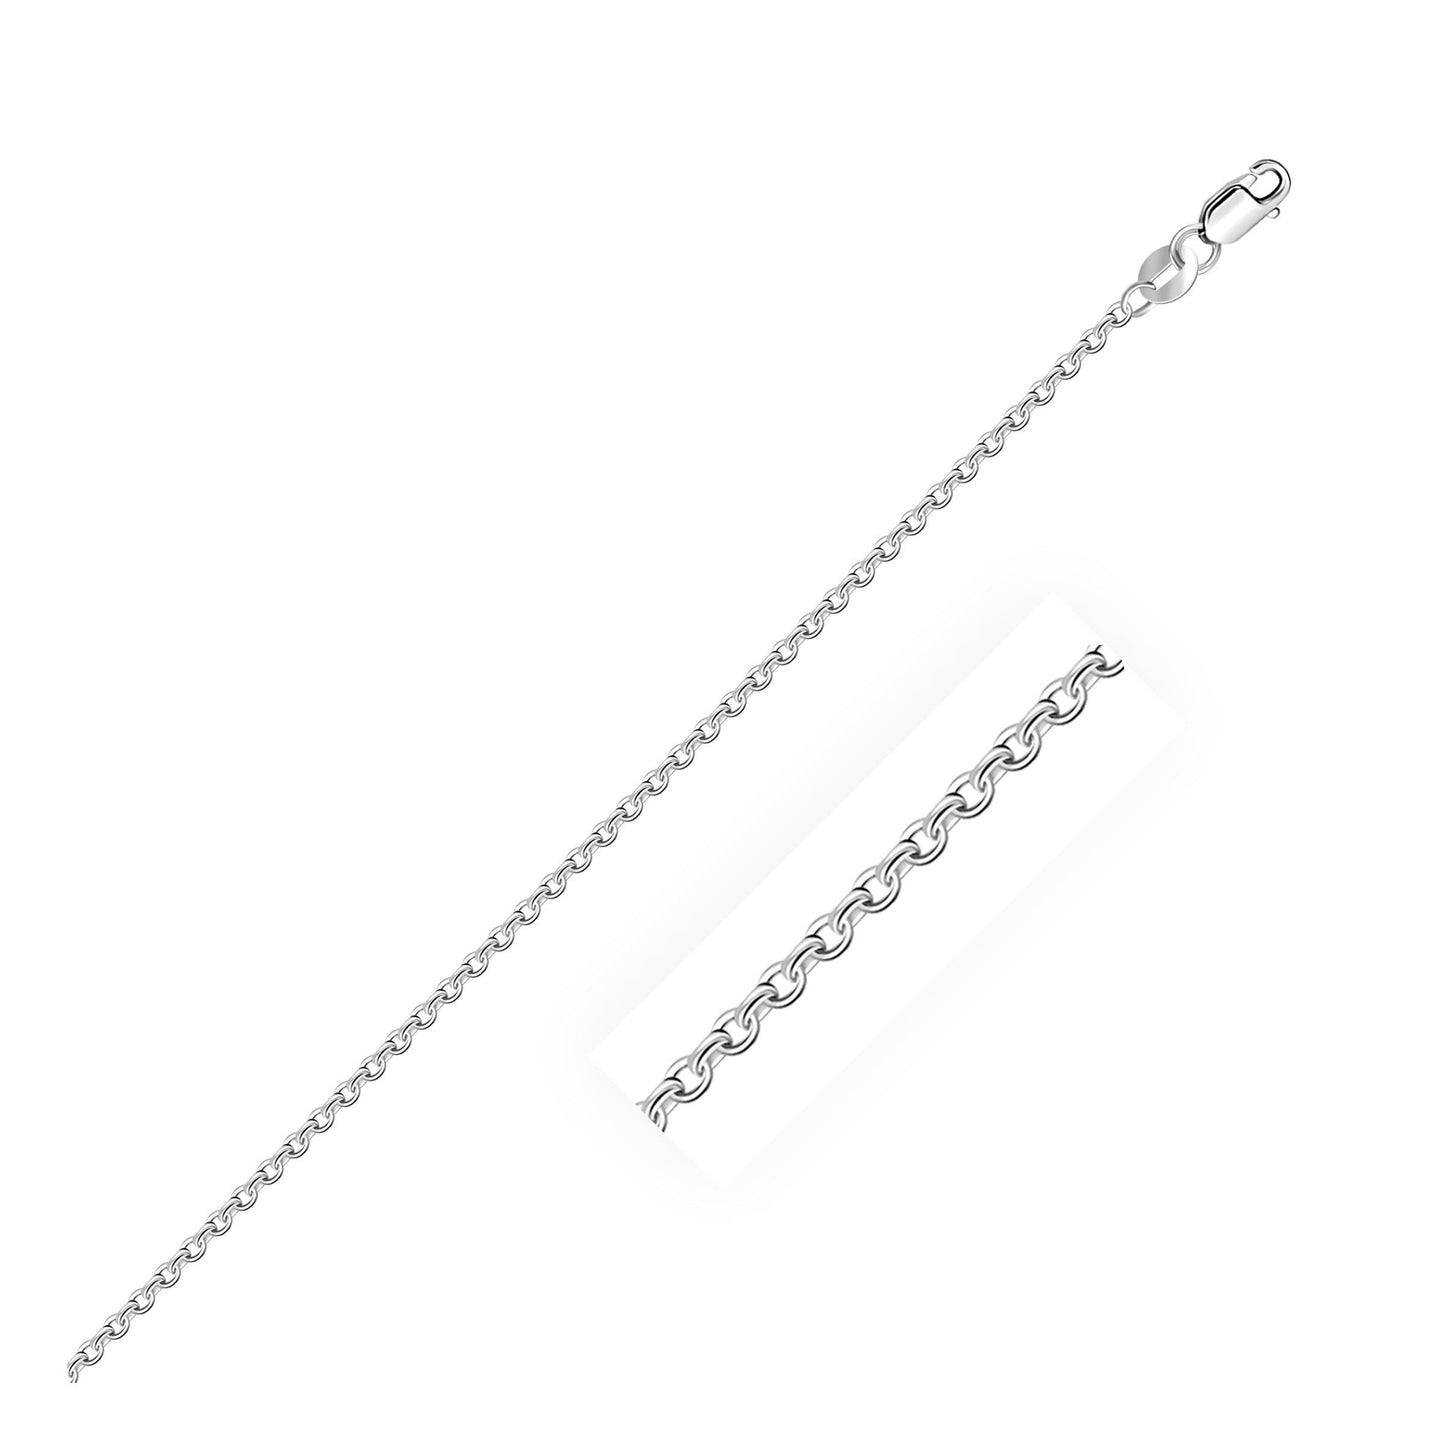 14k White Gold Cable Link Chain in 1.4 mm